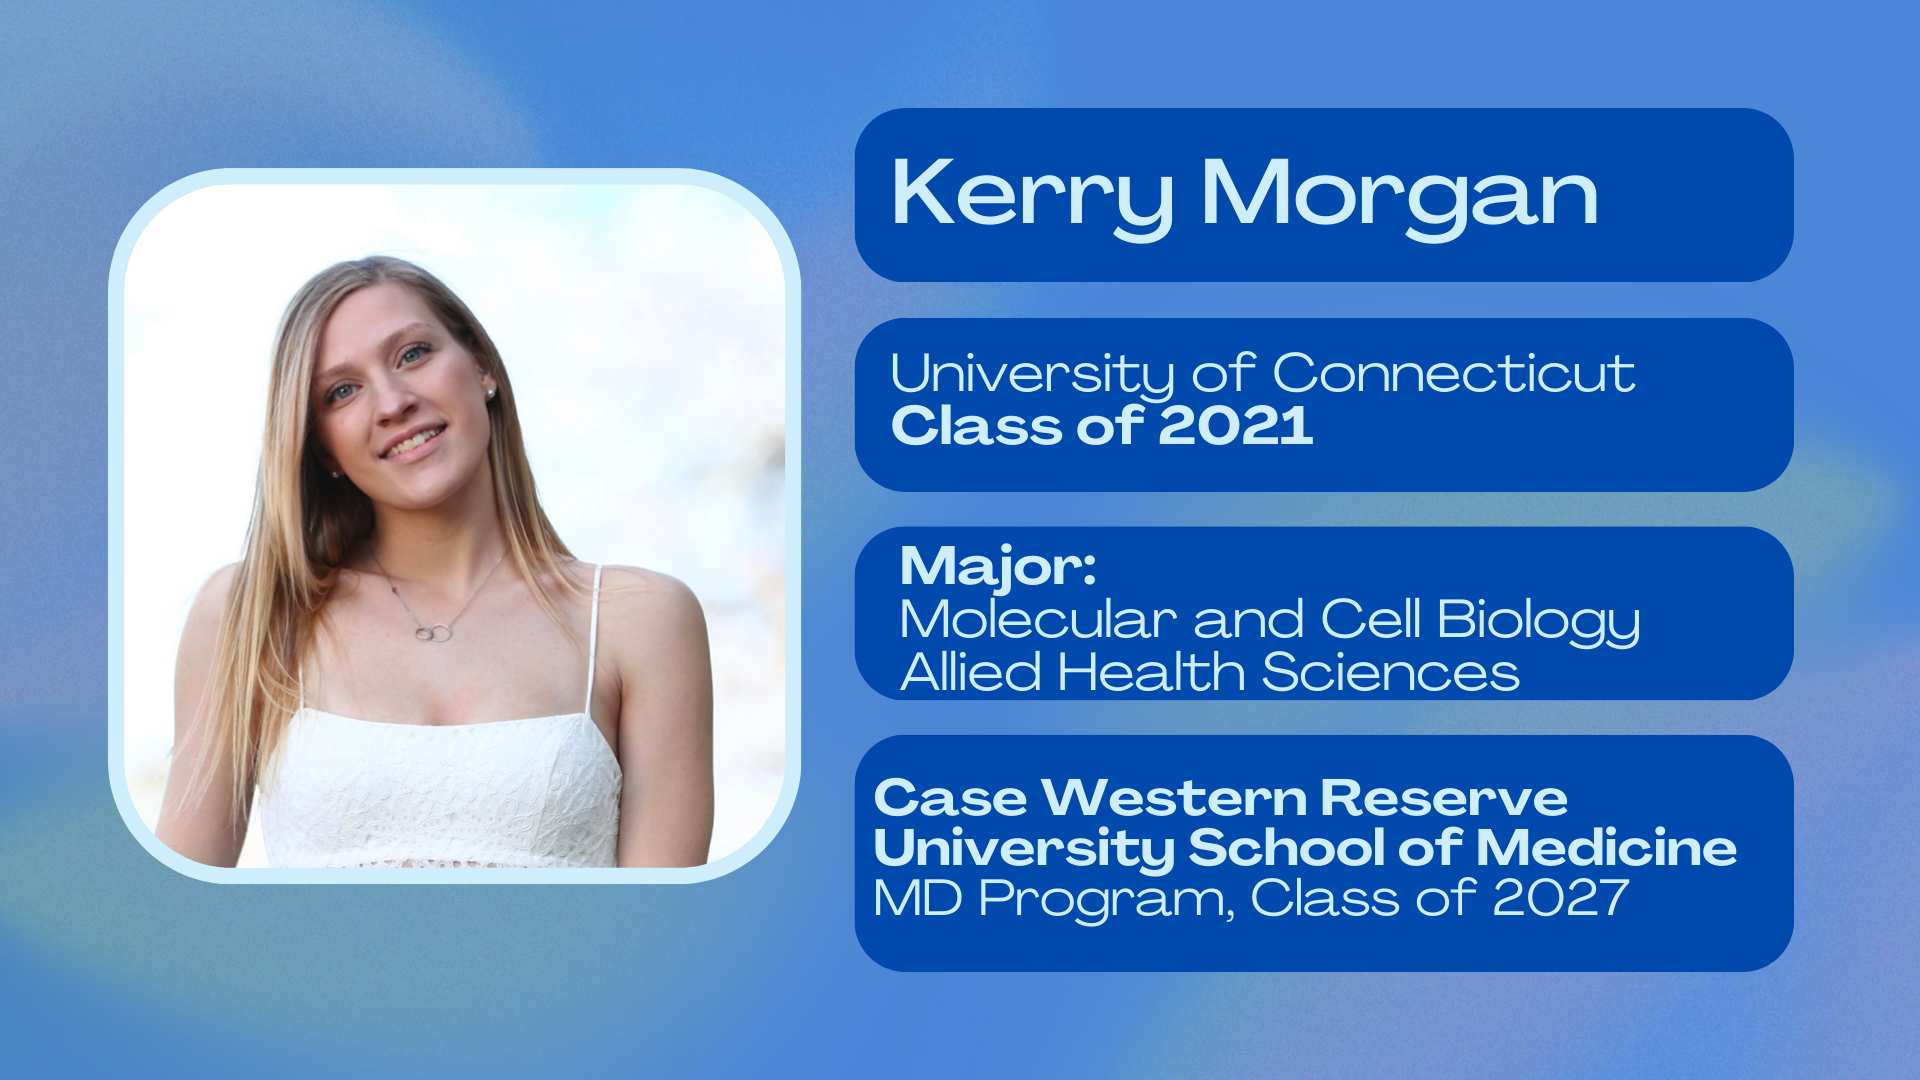 Kerry Morgan; University of Connecticut class of 2021; Major: Molecular and Cell Biology and Allied Health Sciences; Case Western Reserve University School of Medicine MD program class of 2027